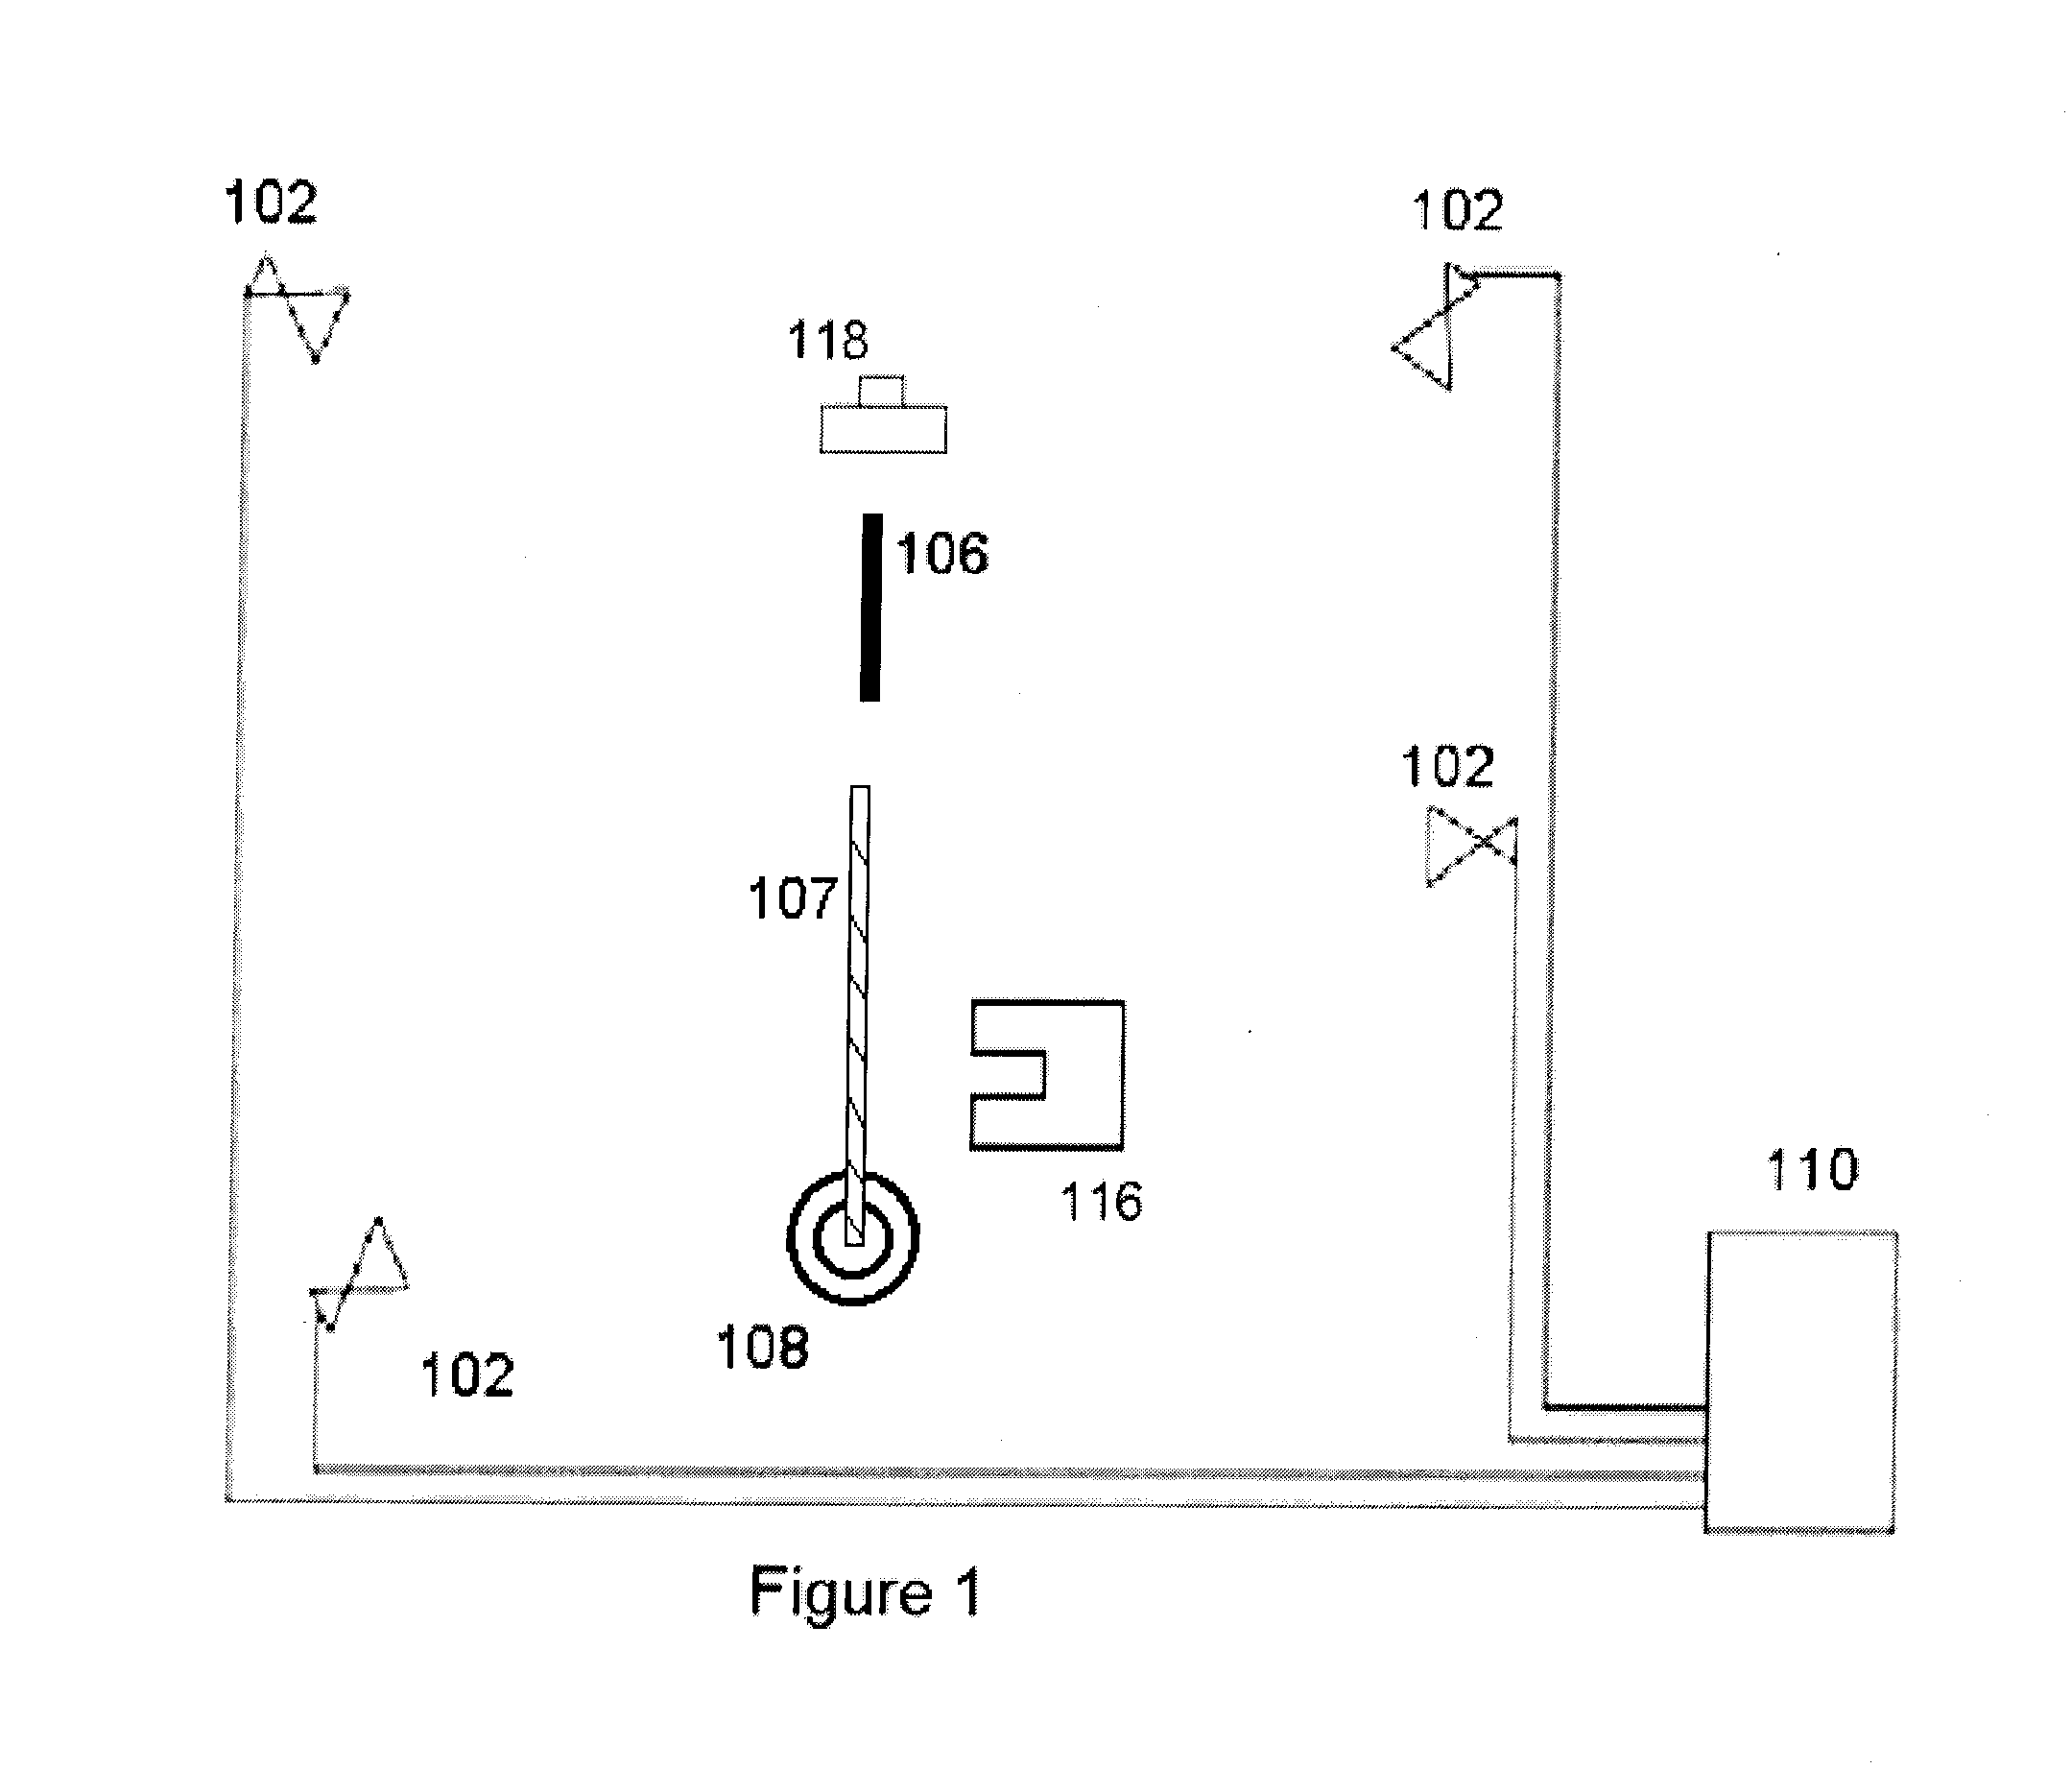 System and method for locating, measuring, counting, and aiding in the handling of drill pipes